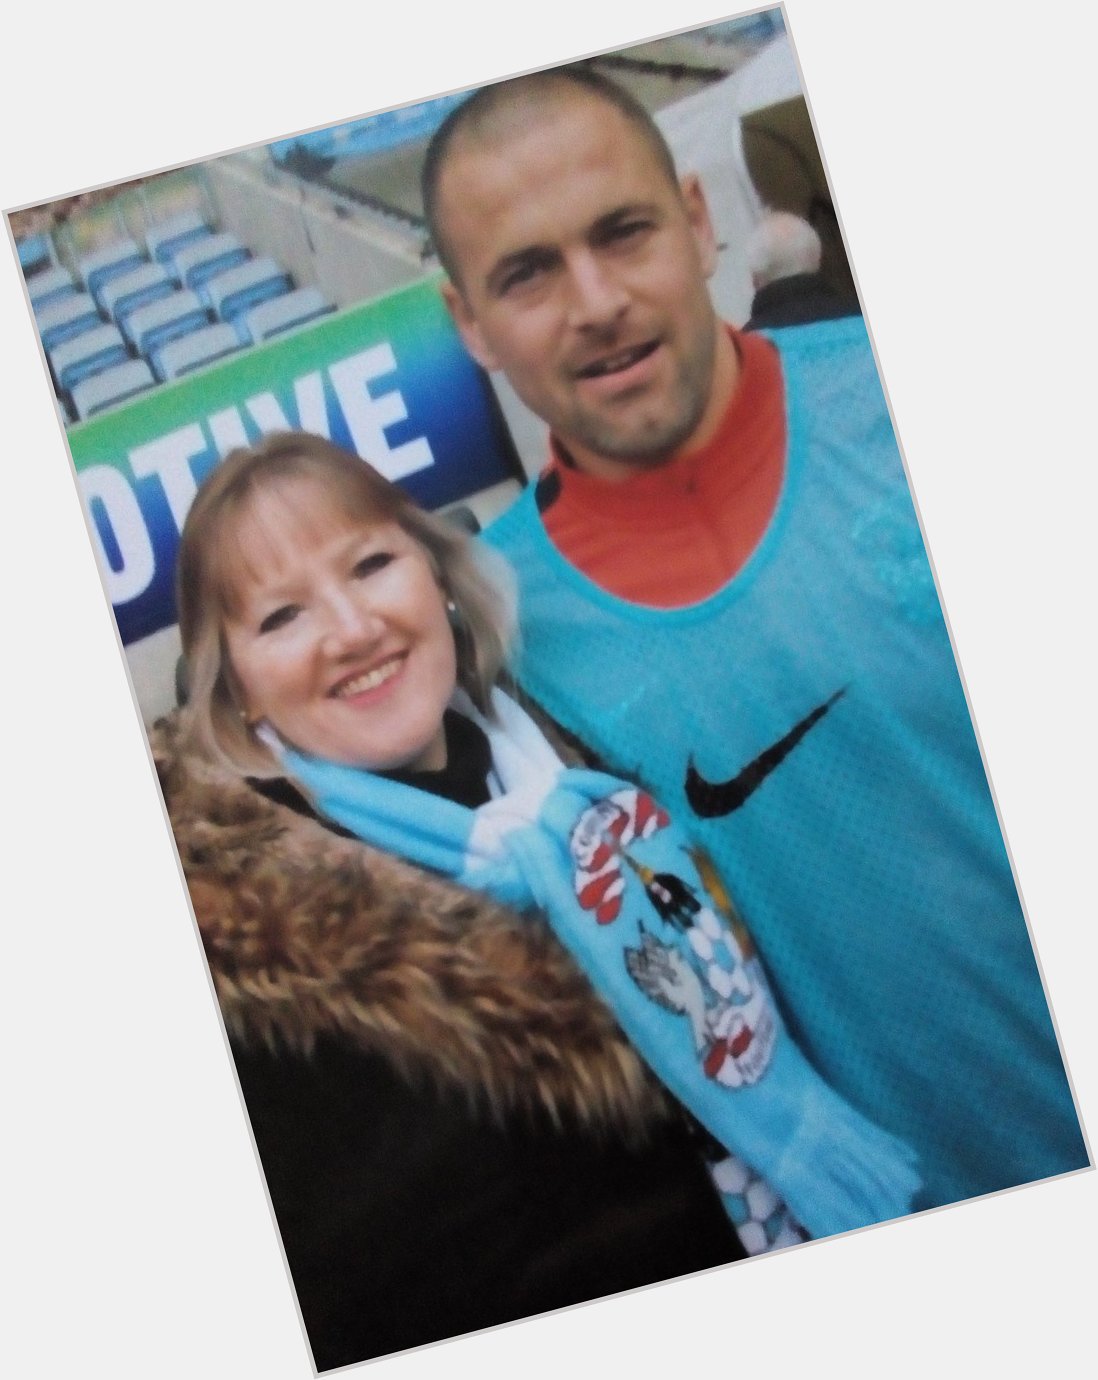 Me and hubby would like to wish former player Joe cole a very happy 37th birthday.xx 